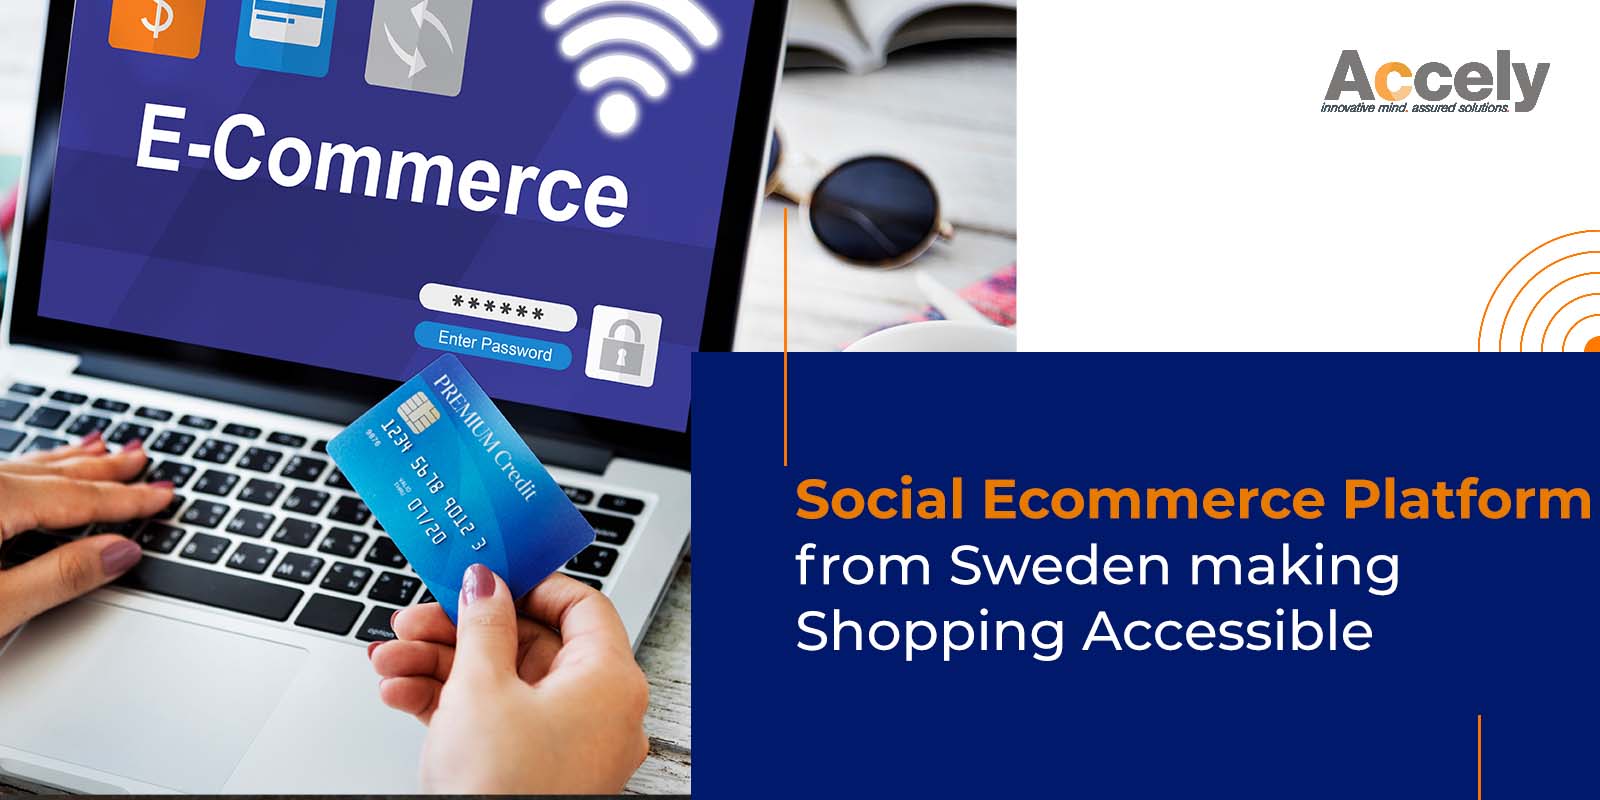 Social Ecommerce Platform from Sweden making Shopping Accessible